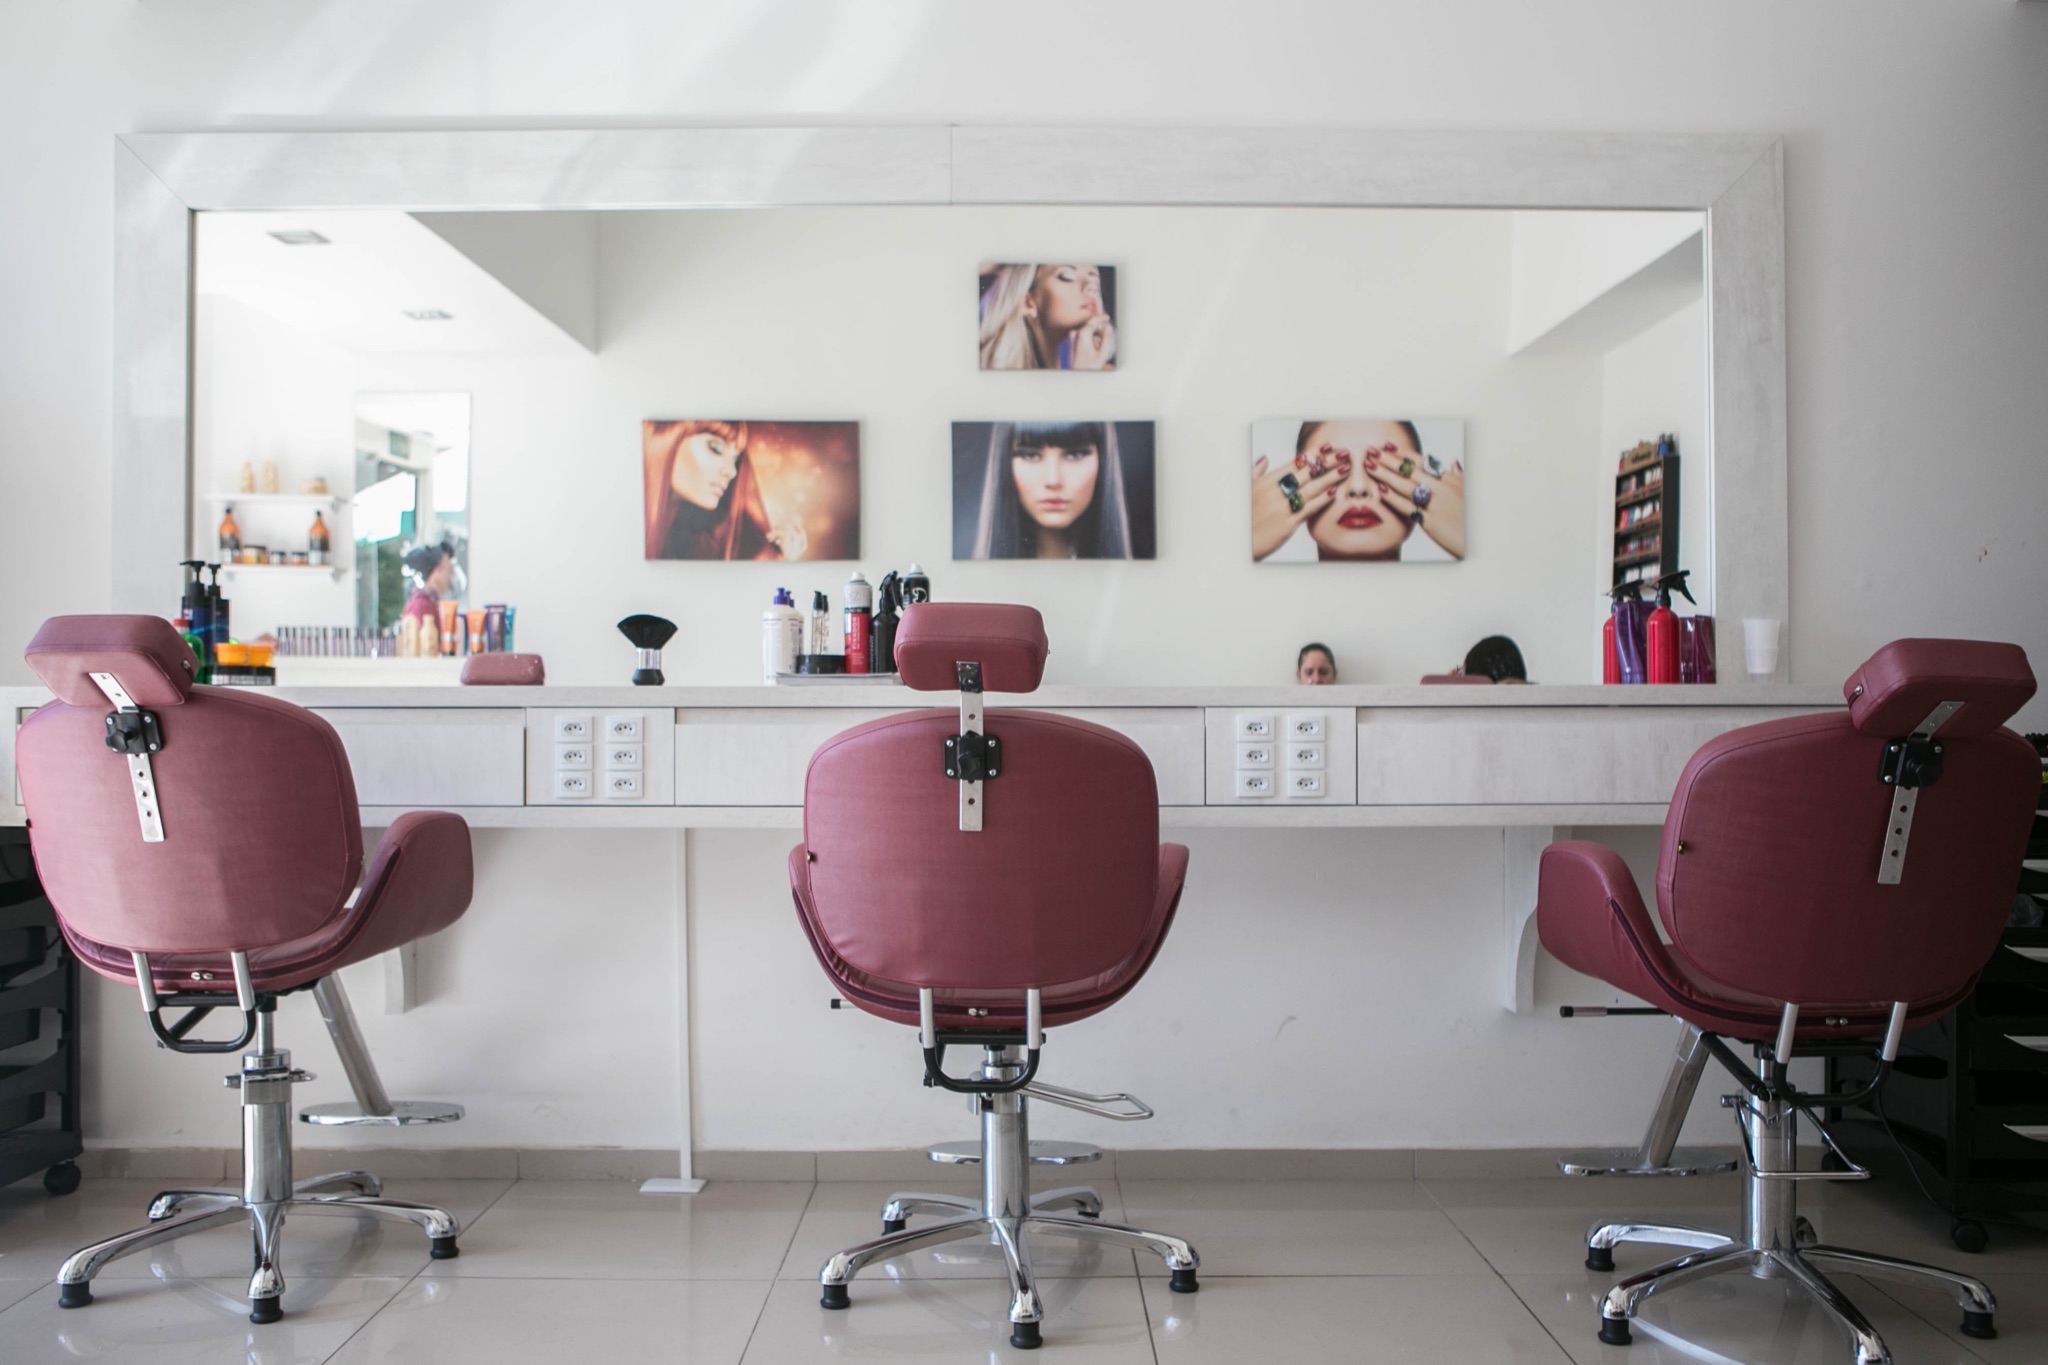 Stock Photo Of A Hair Salon Using A Professional Licence